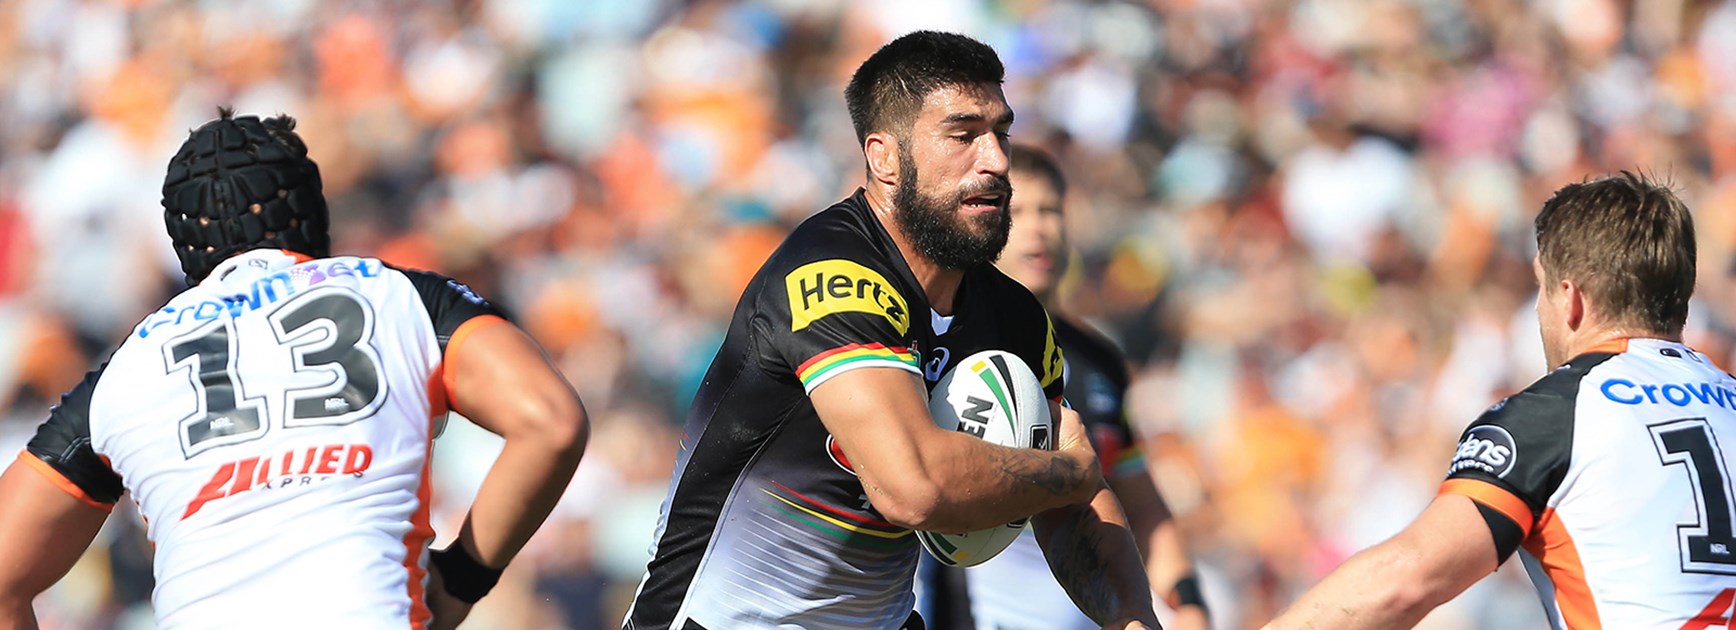 Panthers prop James Tamou takes a hit-up against Wests Tigers in Round 2 of the Telstra Premiership.